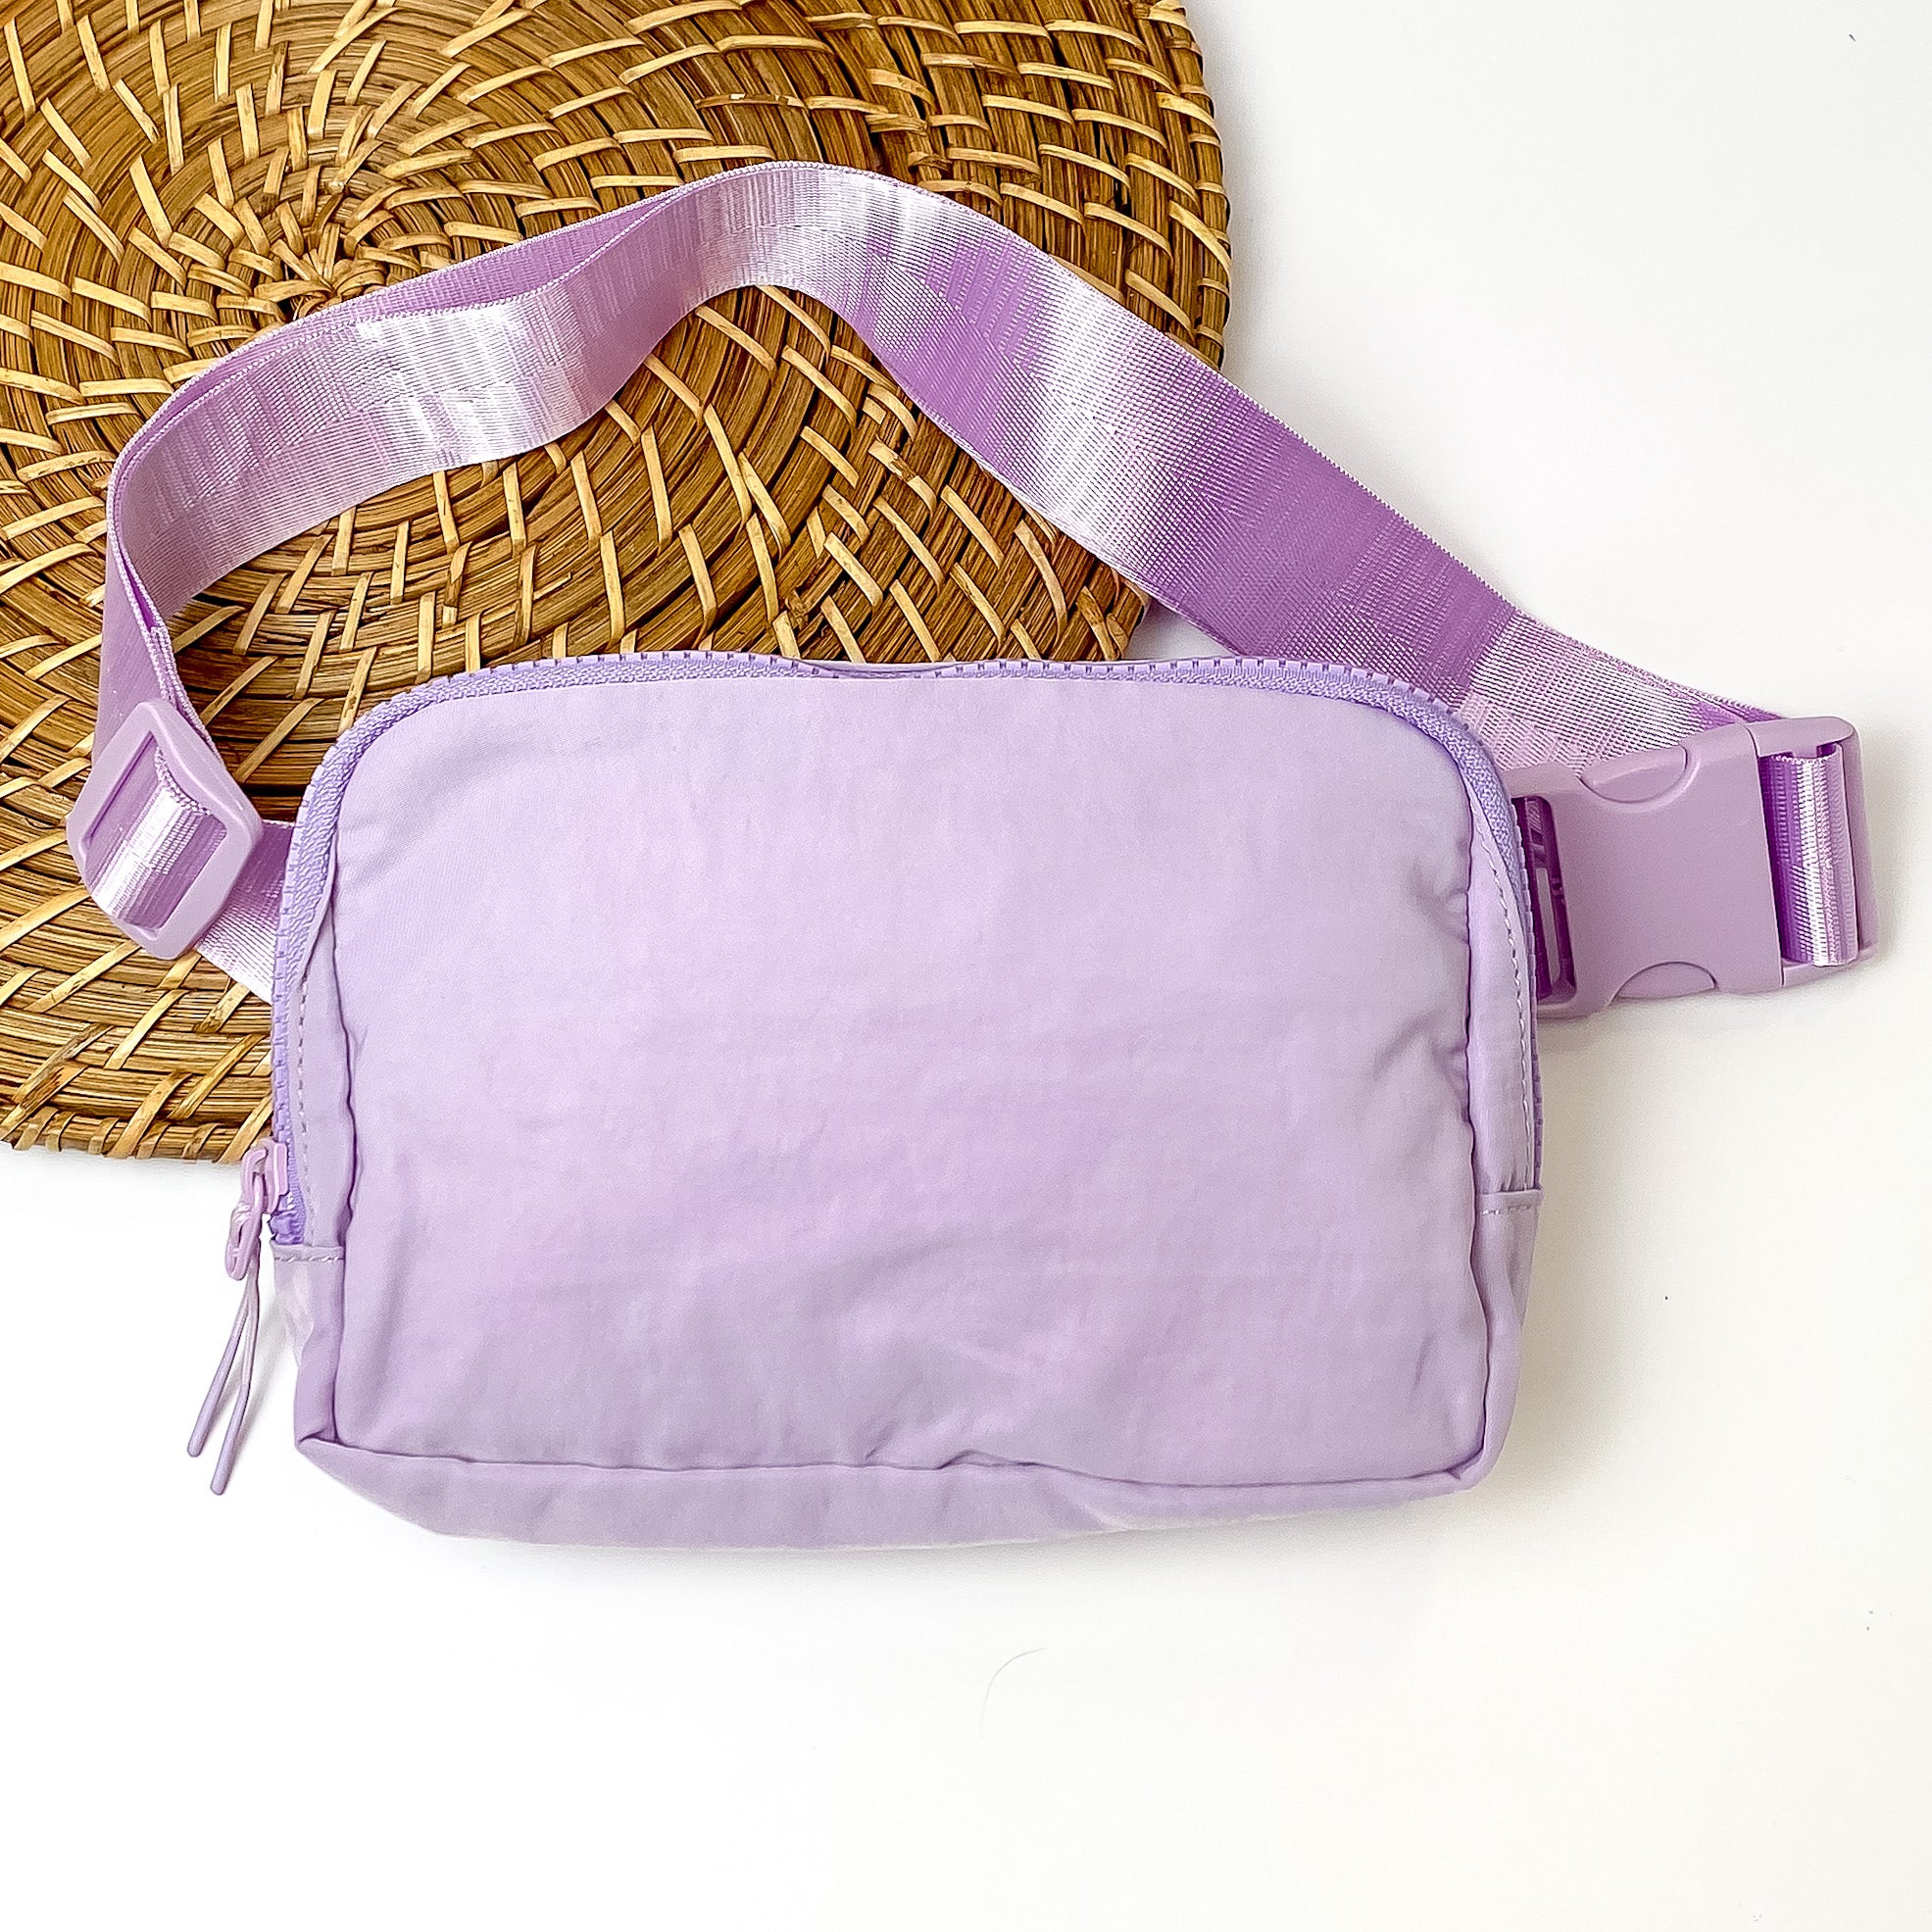 Pictured is a rectangle fanny pack with a top zipper with tassel in light purple. This bag also includes a light purple strap and light purple accents. This bag is pictured on a white and brown patterned background. 